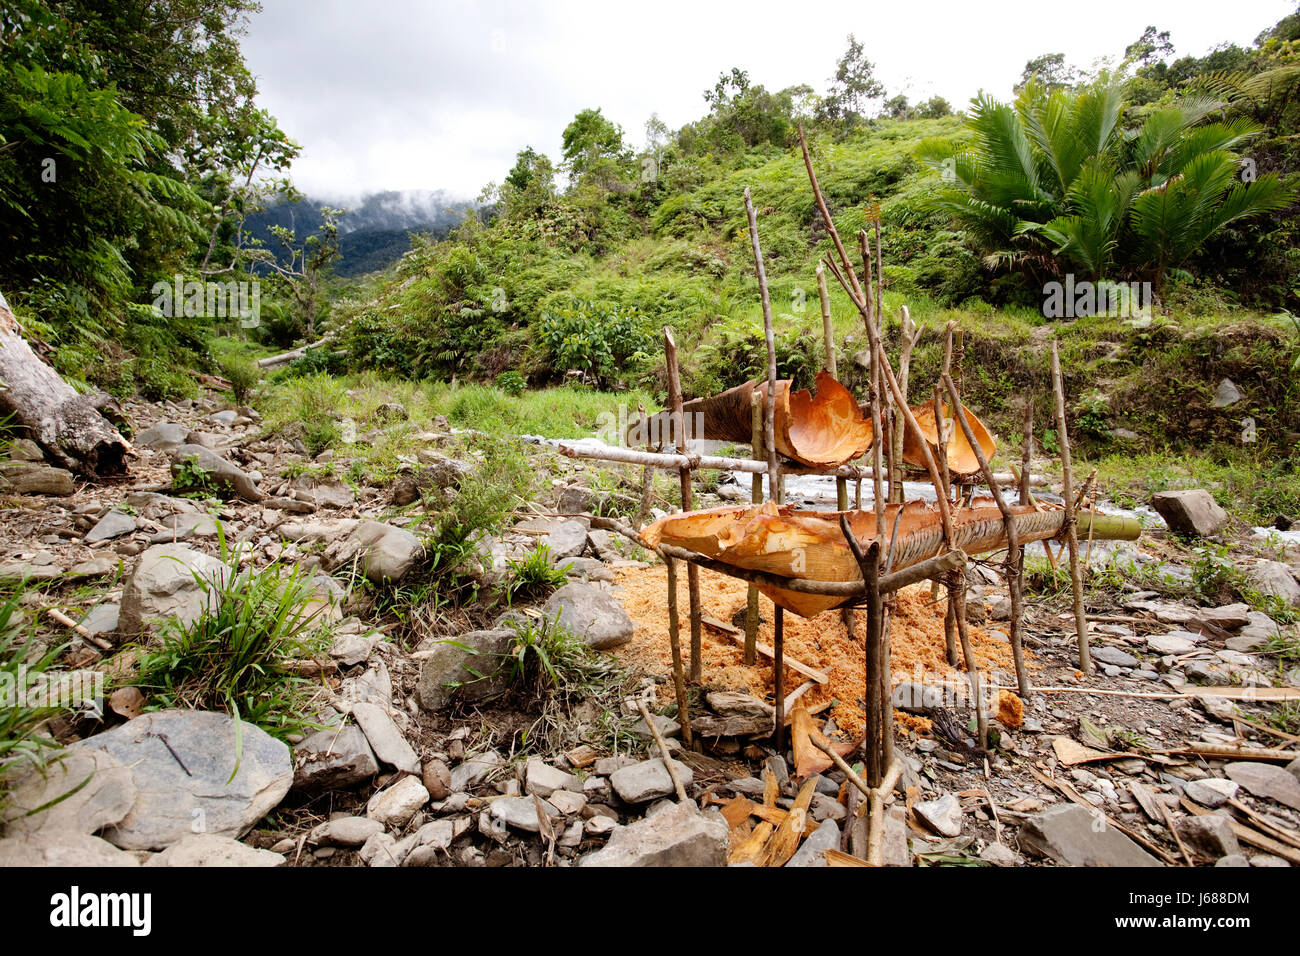 food aliment tool new stream jungle production bamboo palm staple primitive Stock Photo